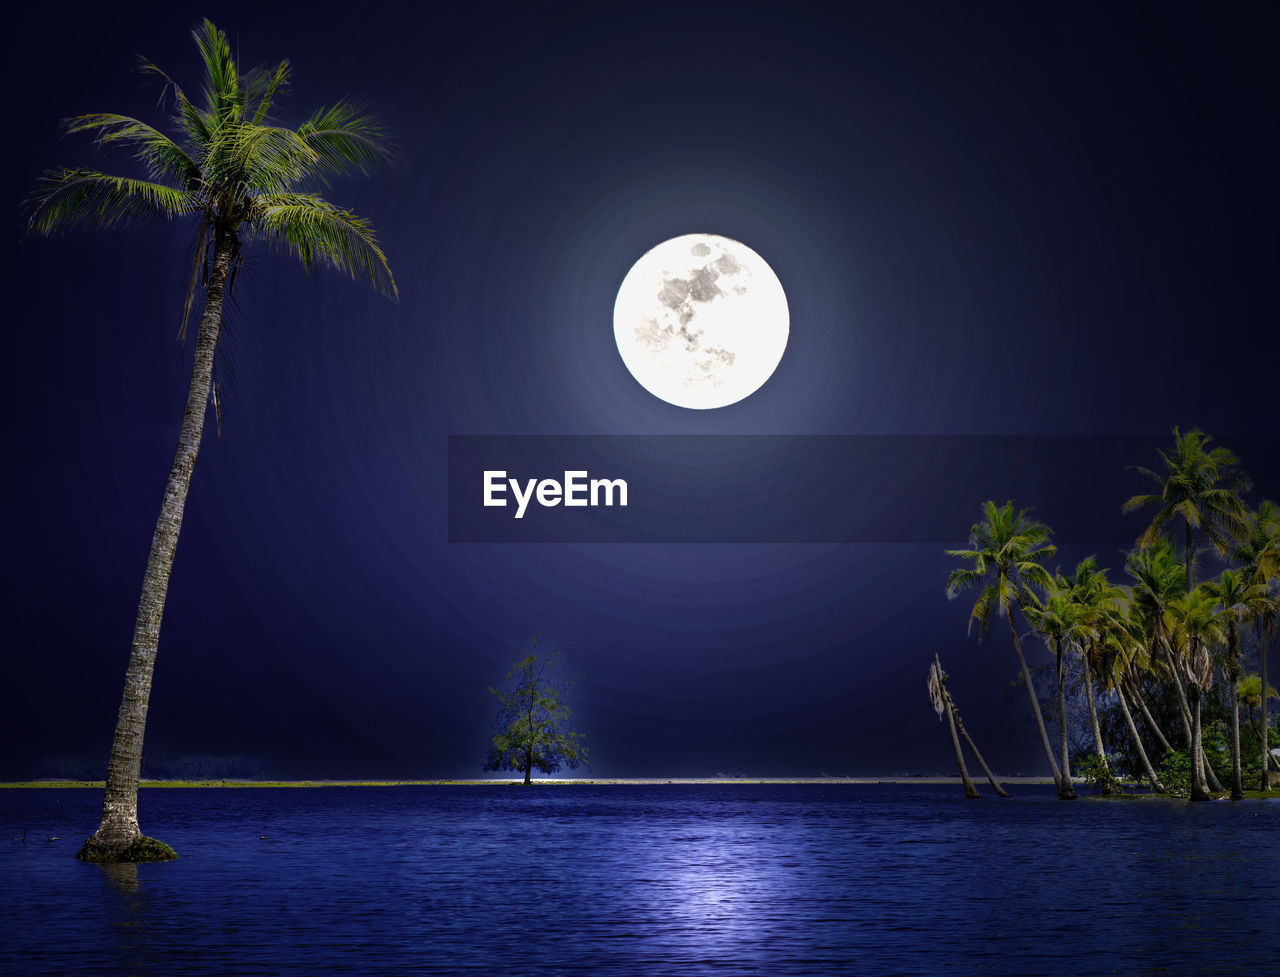 moon, tree, moonlight, full moon, palm tree, night, plant, water, nature, sky, tropical climate, beauty in nature, no people, scenics - nature, tranquility, sea, darkness, tranquil scene, coconut palm tree, outdoors, land, reflection, blue, screenshot, astronomical object, circle, shape, illuminated, geometric shape, beach, space, environment, light